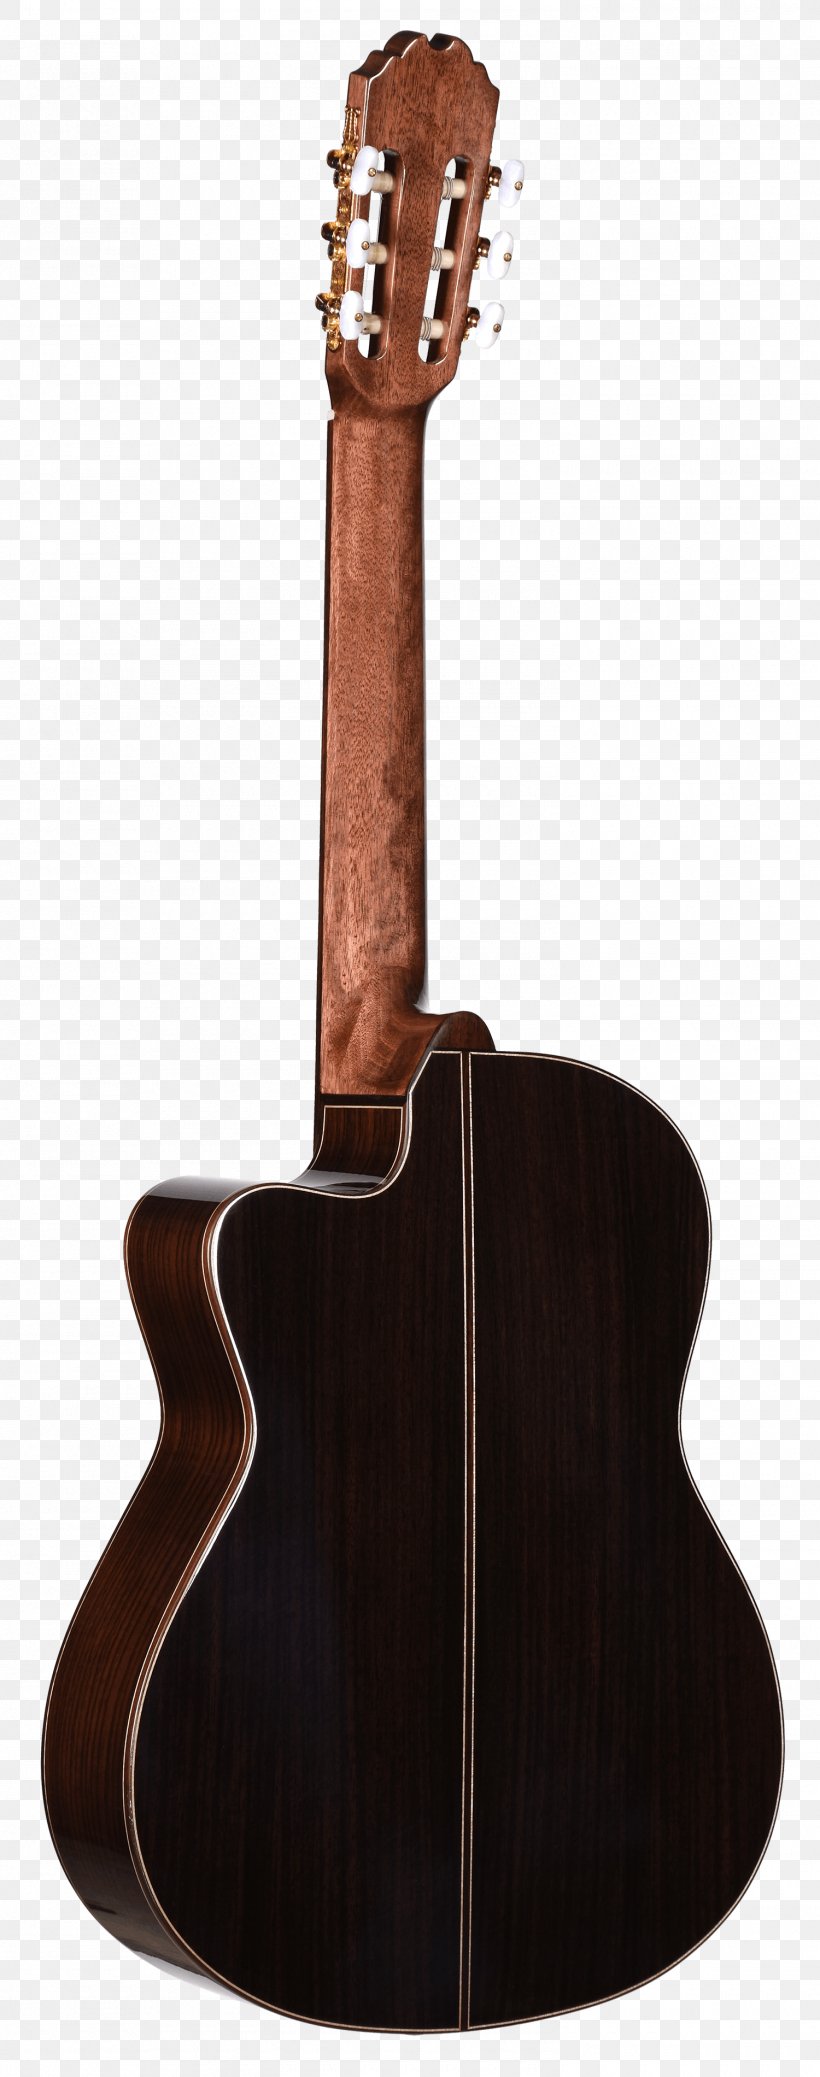 Acoustic Guitar Cutaway Yamaha A3R C. F. Martin & Company, PNG, 1500x3800px, Guitar, Acoustic Electric Guitar, Acoustic Guitar, Acousticelectric Guitar, C F Martin Company Download Free